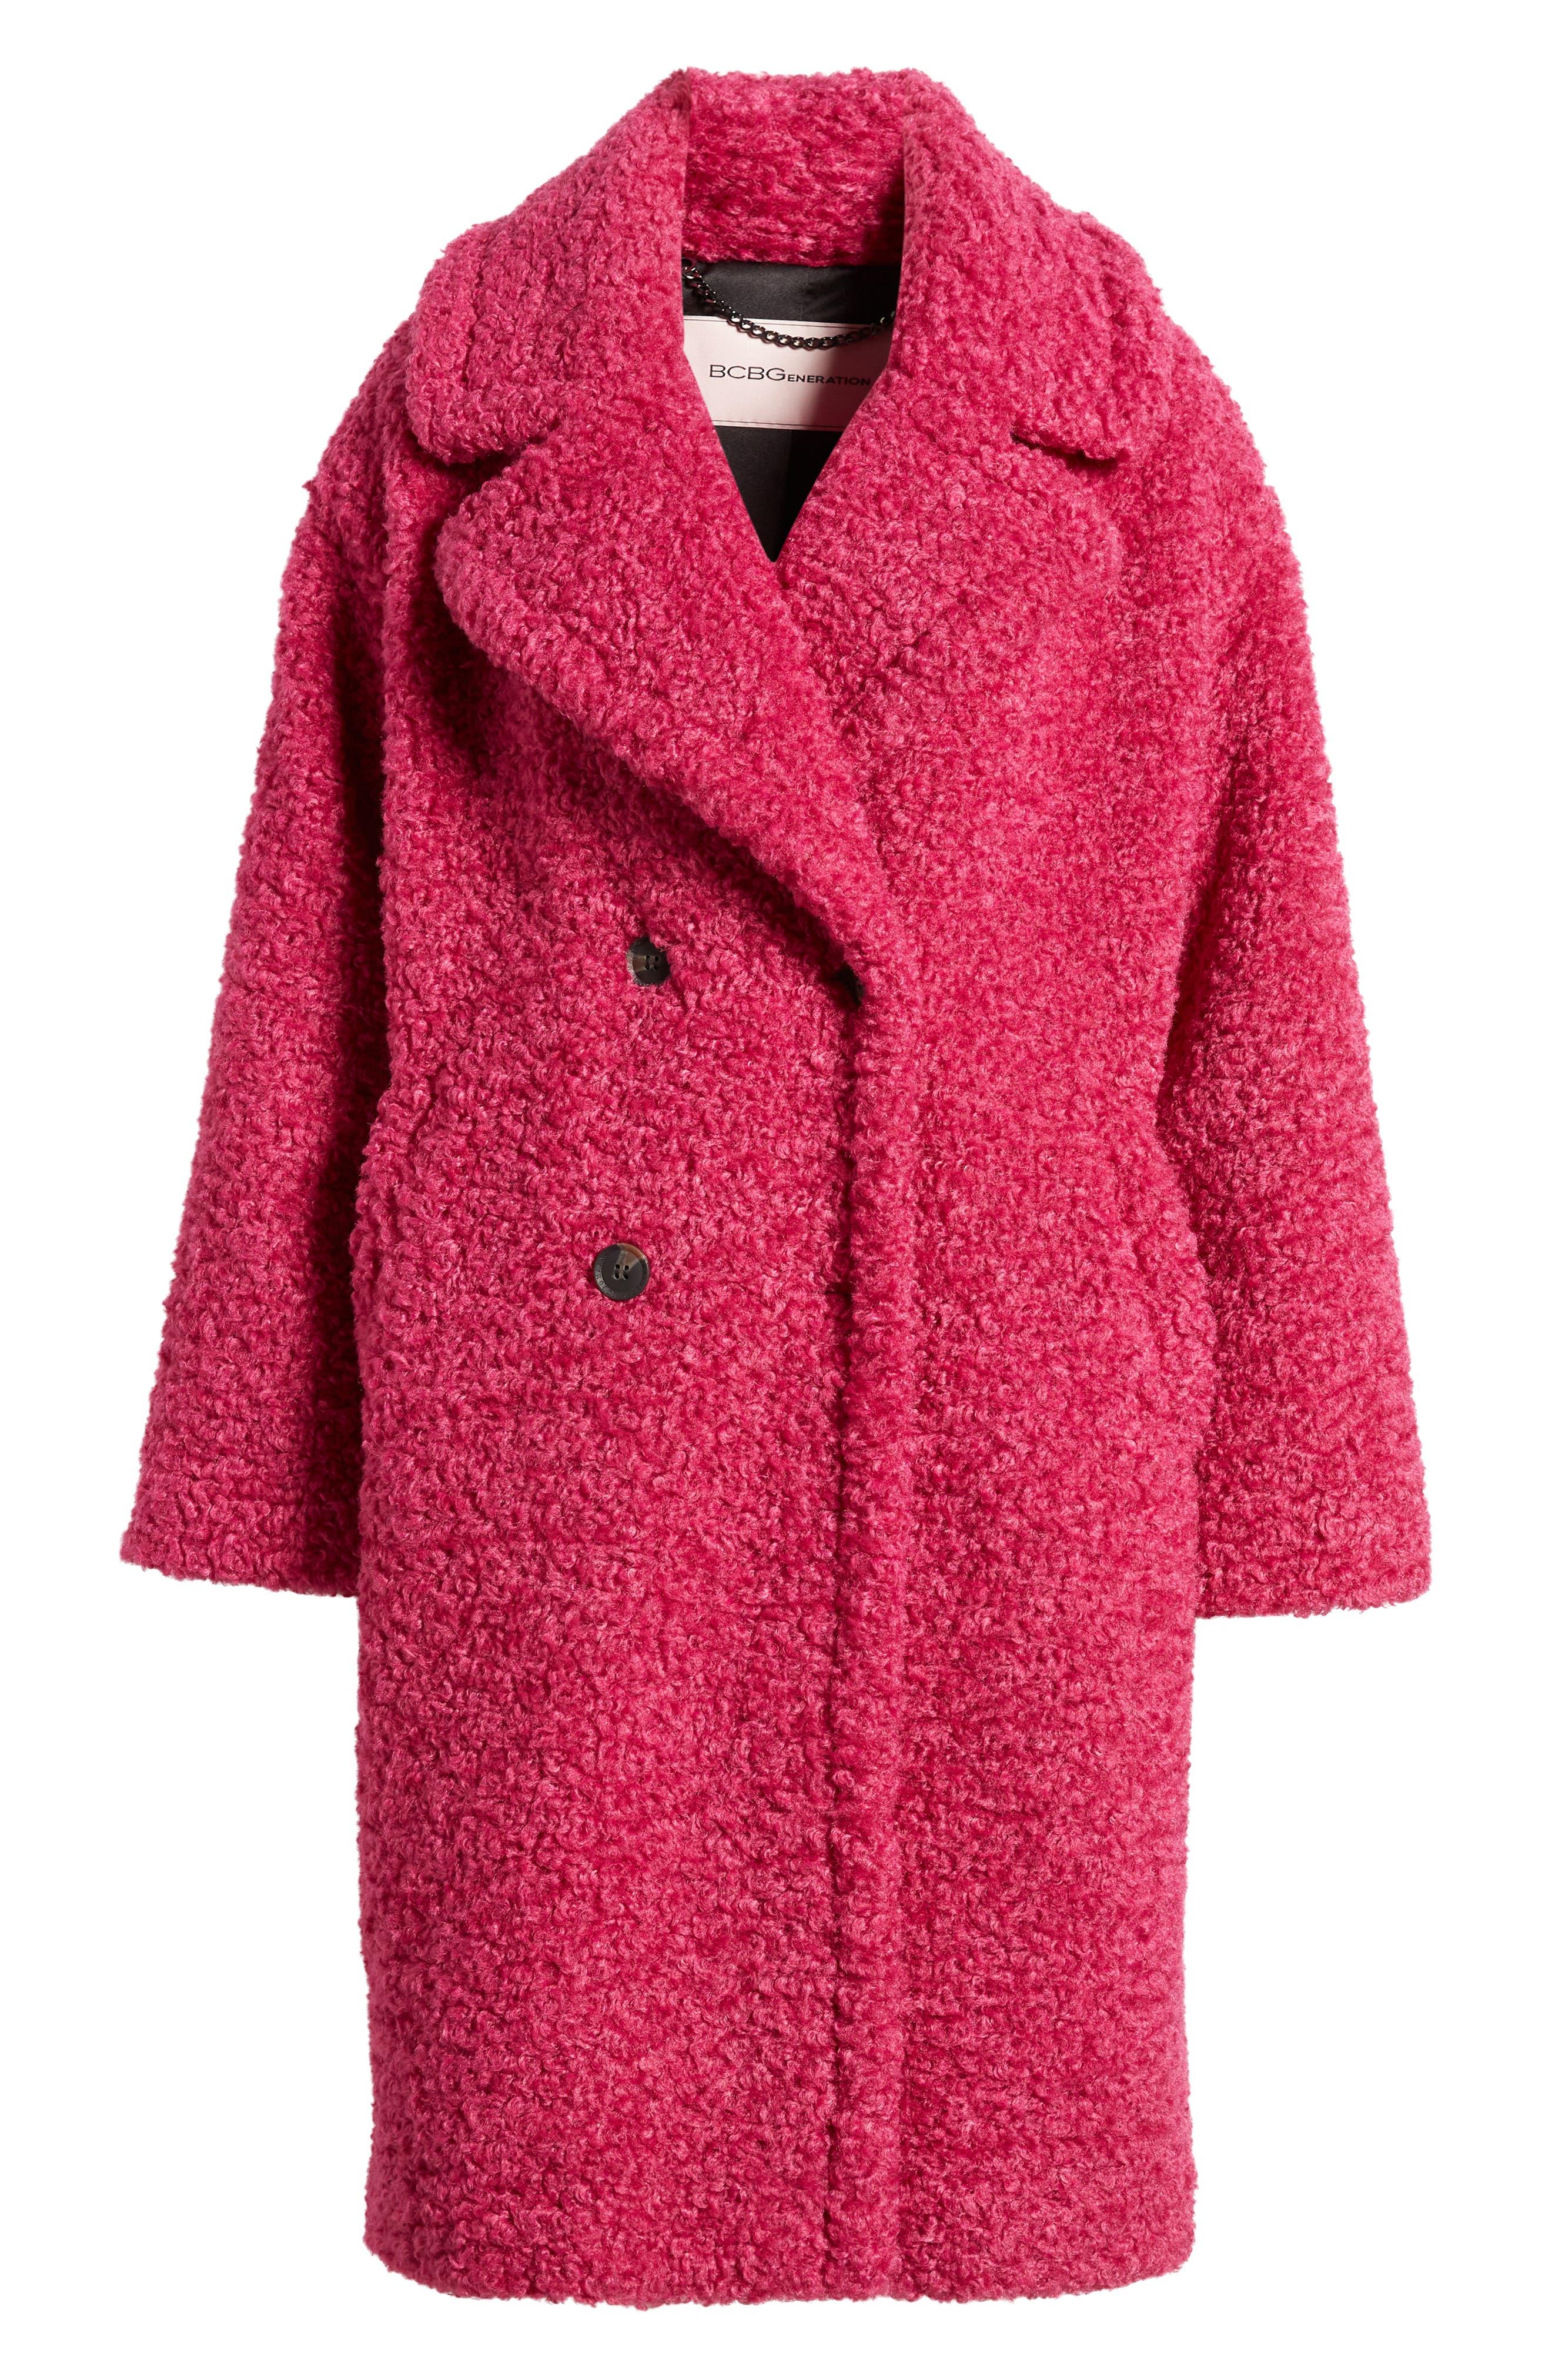 BCBGMAXAZRIA Double Breasted Faux Fur Teddy Coat in Pink | Lyst